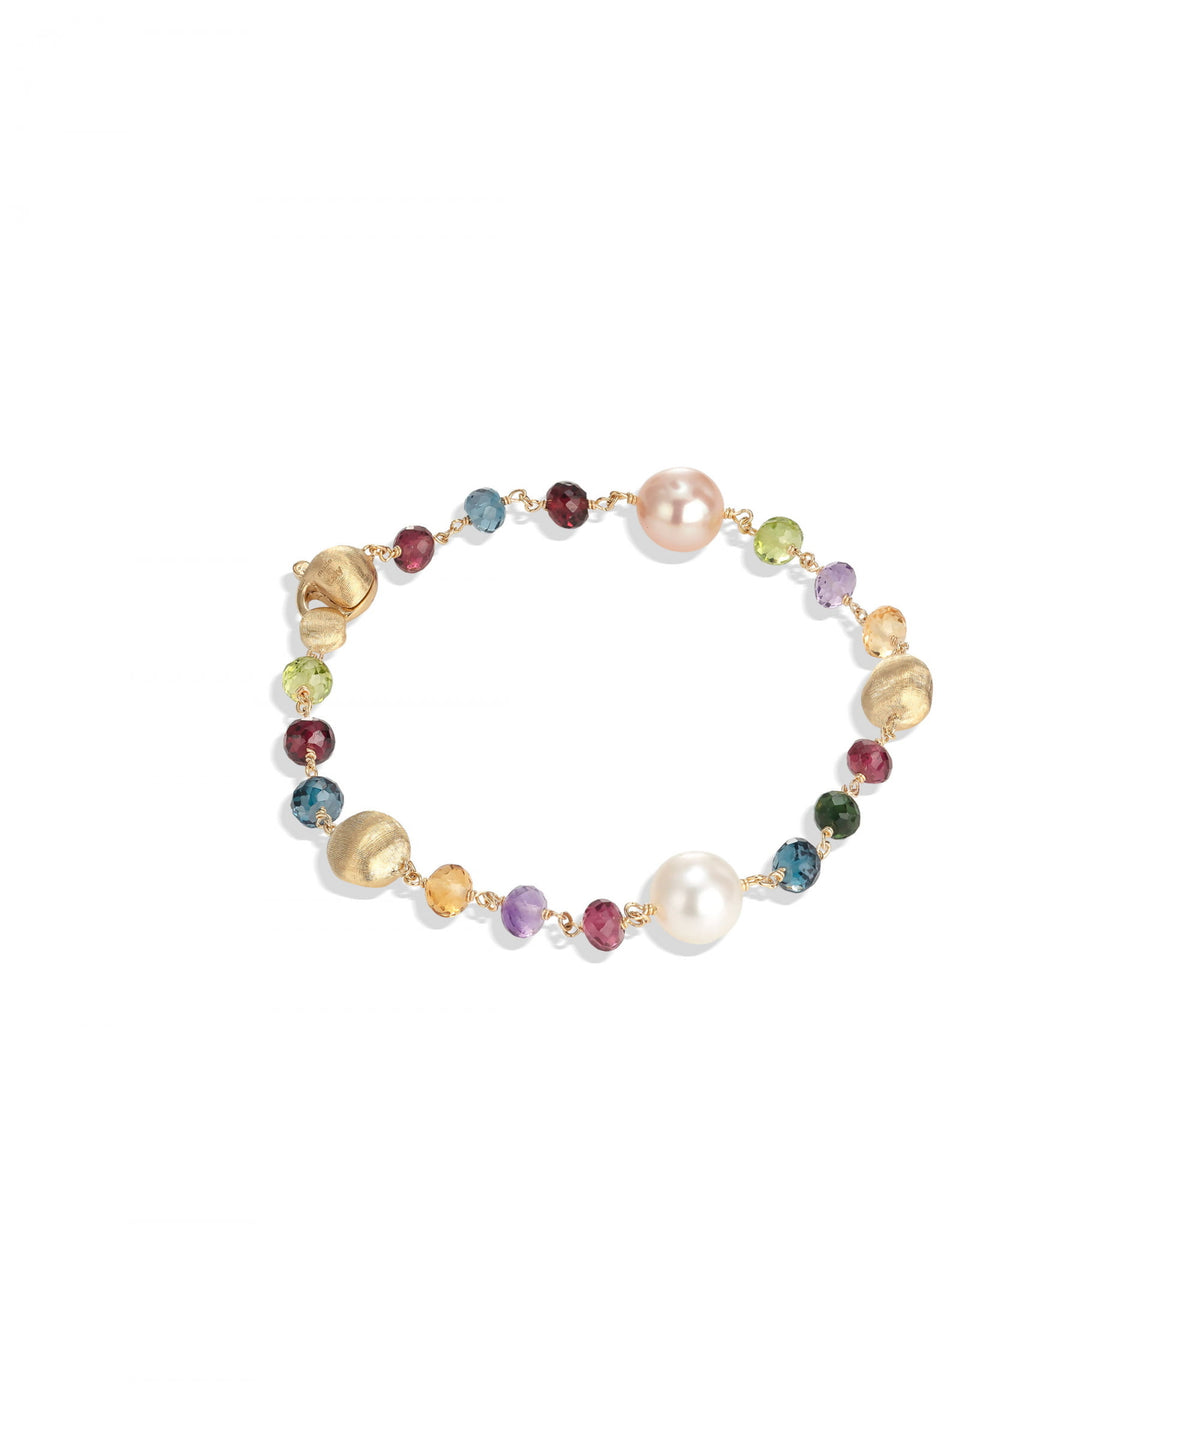 Africa Gemstone Bracelet in 18k Yellow Gold with Gemstones and Freshwater Pearls - Orsini Jewellers NZ